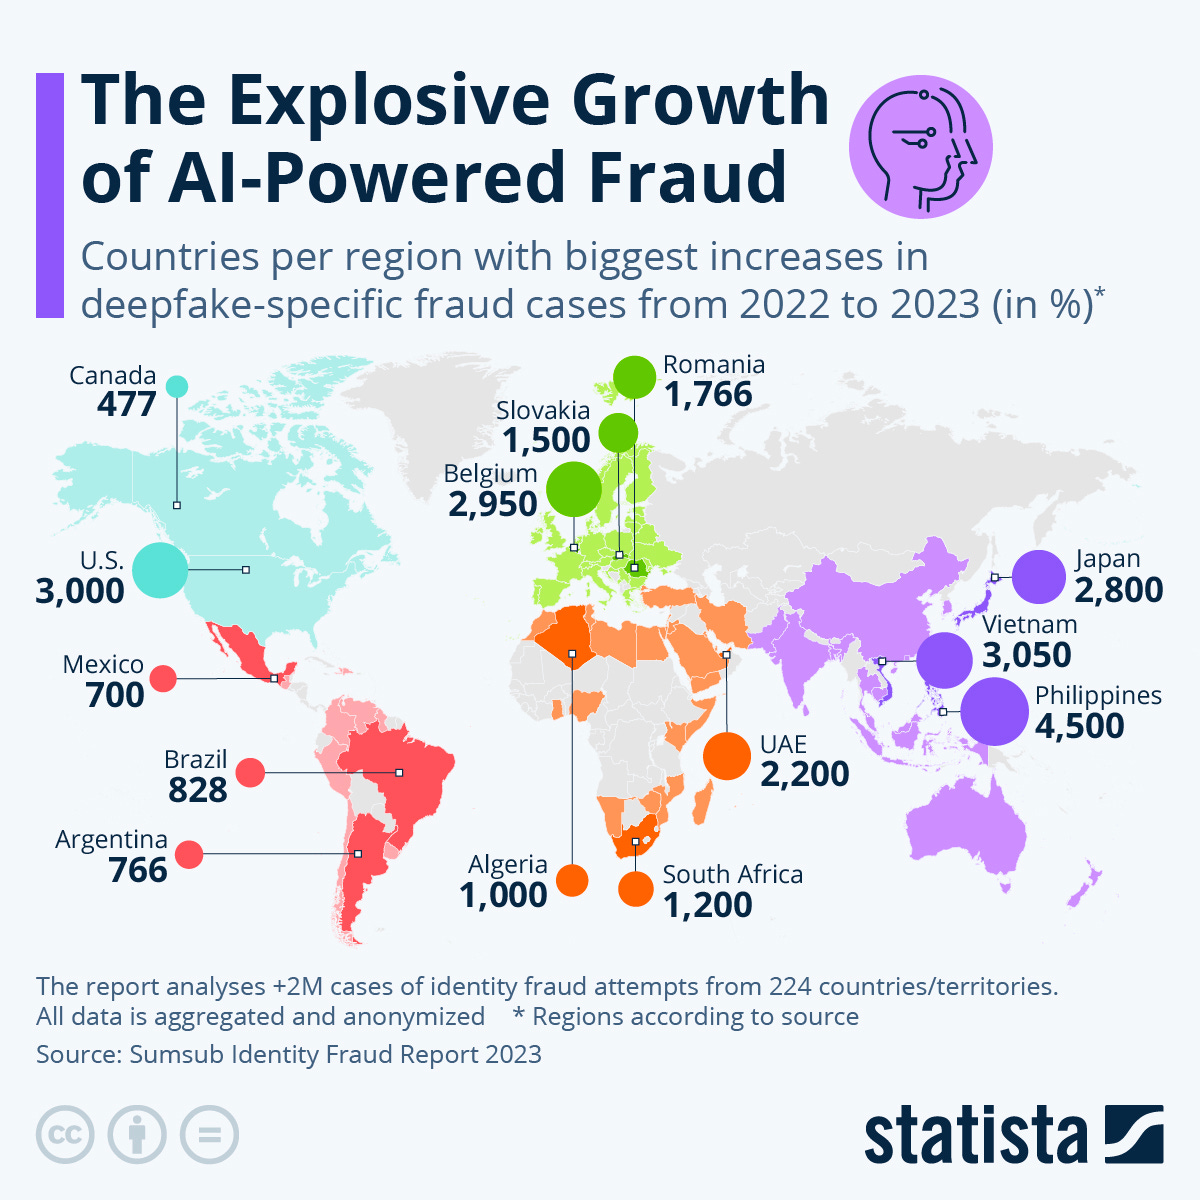 Countries per region with biggest increases in deepfake-specific fraud cases from 2022 to 2023 in percentages: Canada 477, U.S. 3,000, Mexico 700, Brazil 828, Argentina 766, Romania 1,766, Slovakia 1,500, Belgium 2,950, Algeria 1,000, South Africa 1,200, U.A.E. 2,200, Vietnam 3,050, Japan 2,800, and the Philippines 4,500. The report analyses more than 2 million cases of identity fraud attempts from 224 countries and territories. All data is aggregated and anonymised. Source: Sumsub Identity Fraud Report 2023.